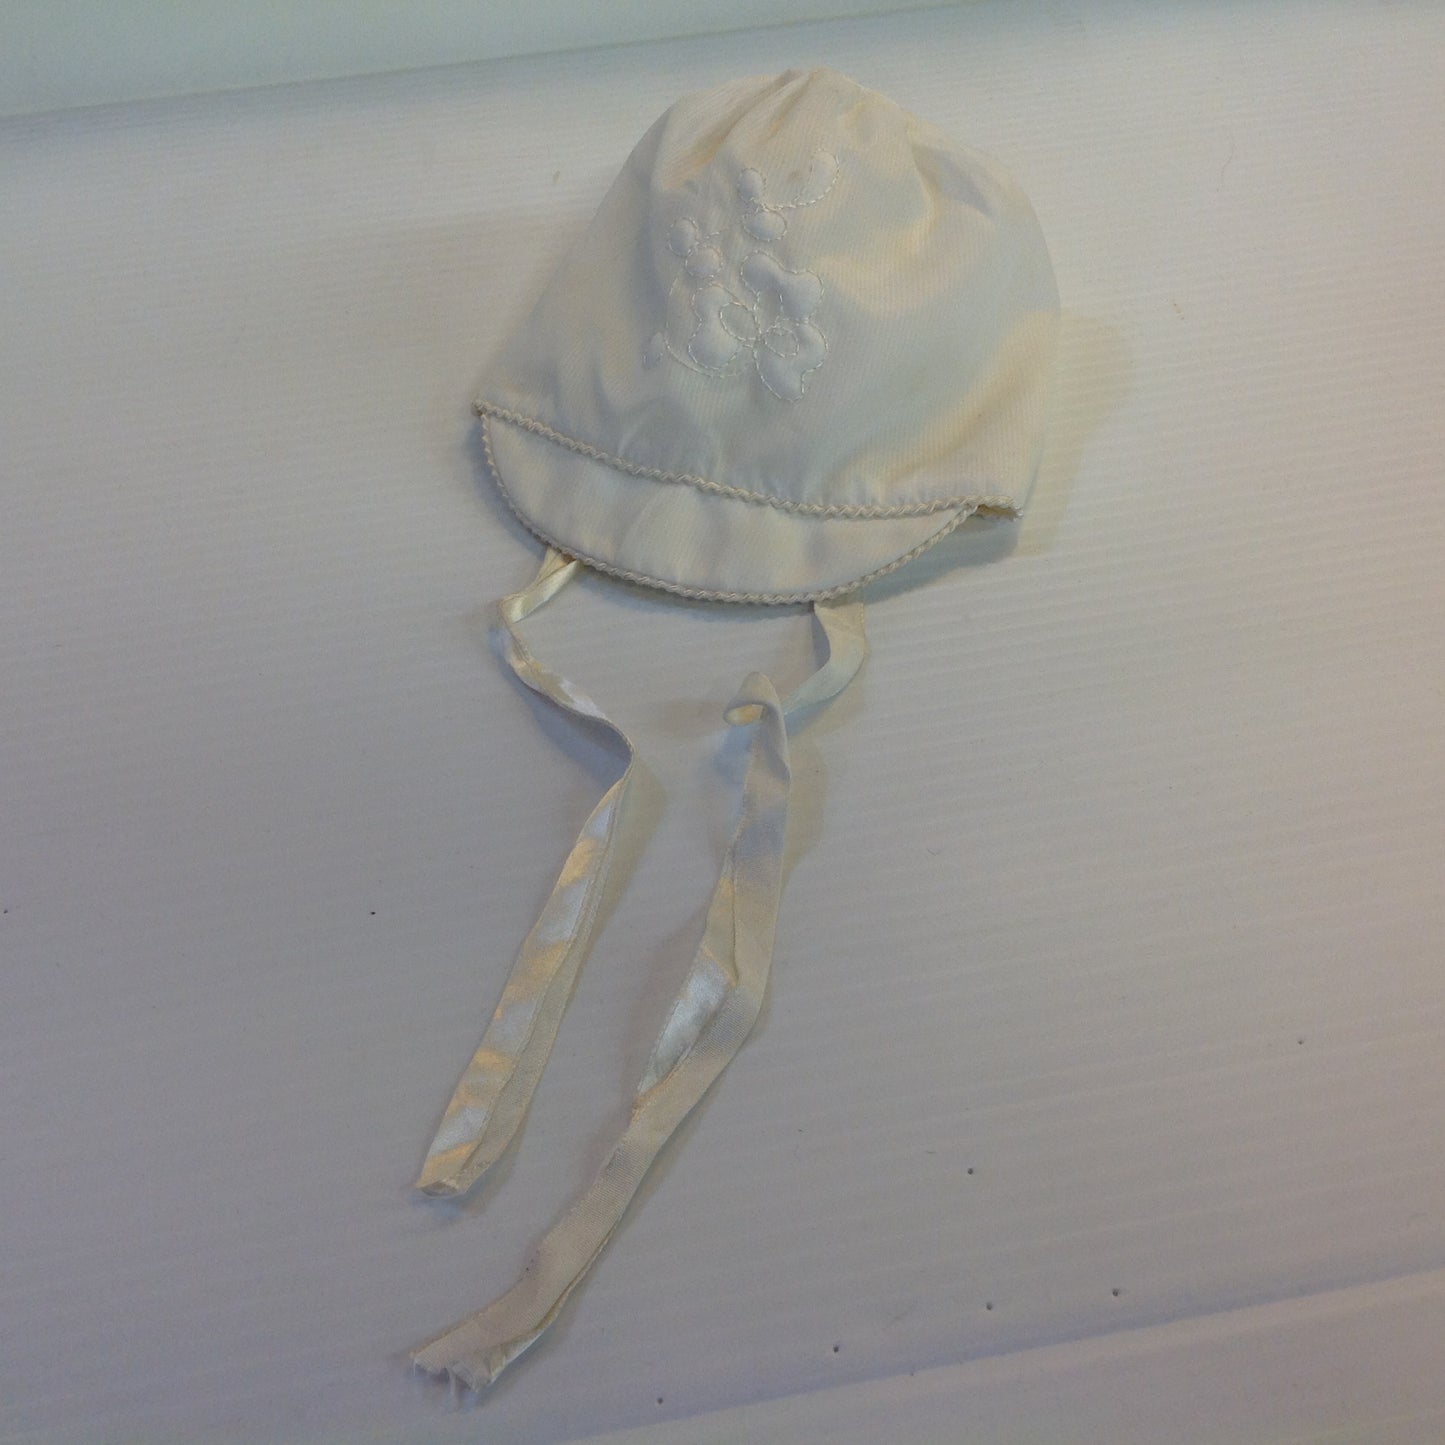 Vintage White Cotton Baby Cap Quilted Flower Satin Ribbons